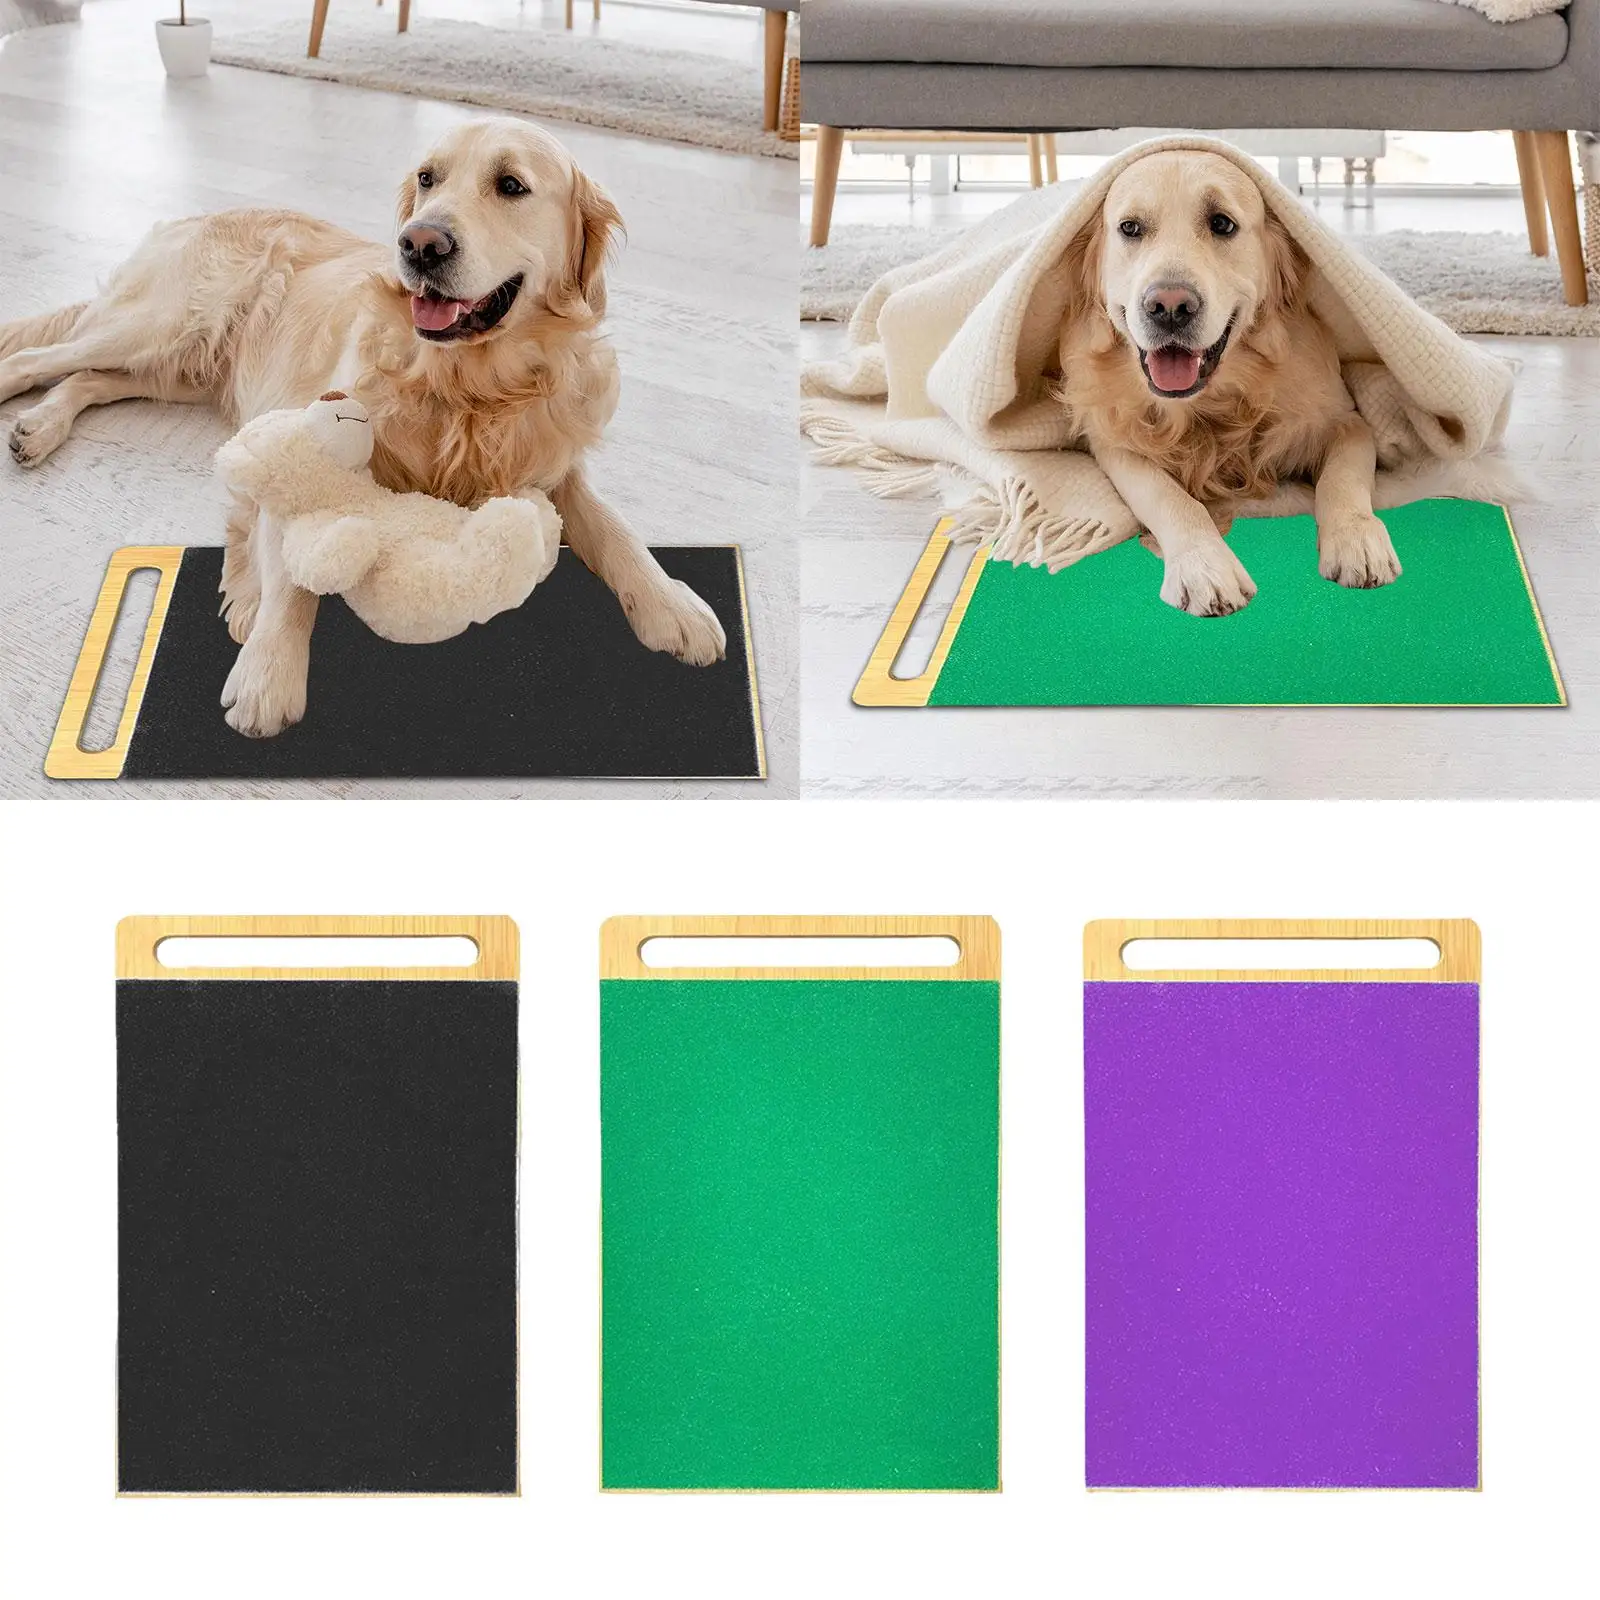 Nail File Scratch Board Pet Supplies Nonslip Toy Grooming Wood Dog Scratch Pad for Nails Doggy Small Medium Large Dogs Trimming